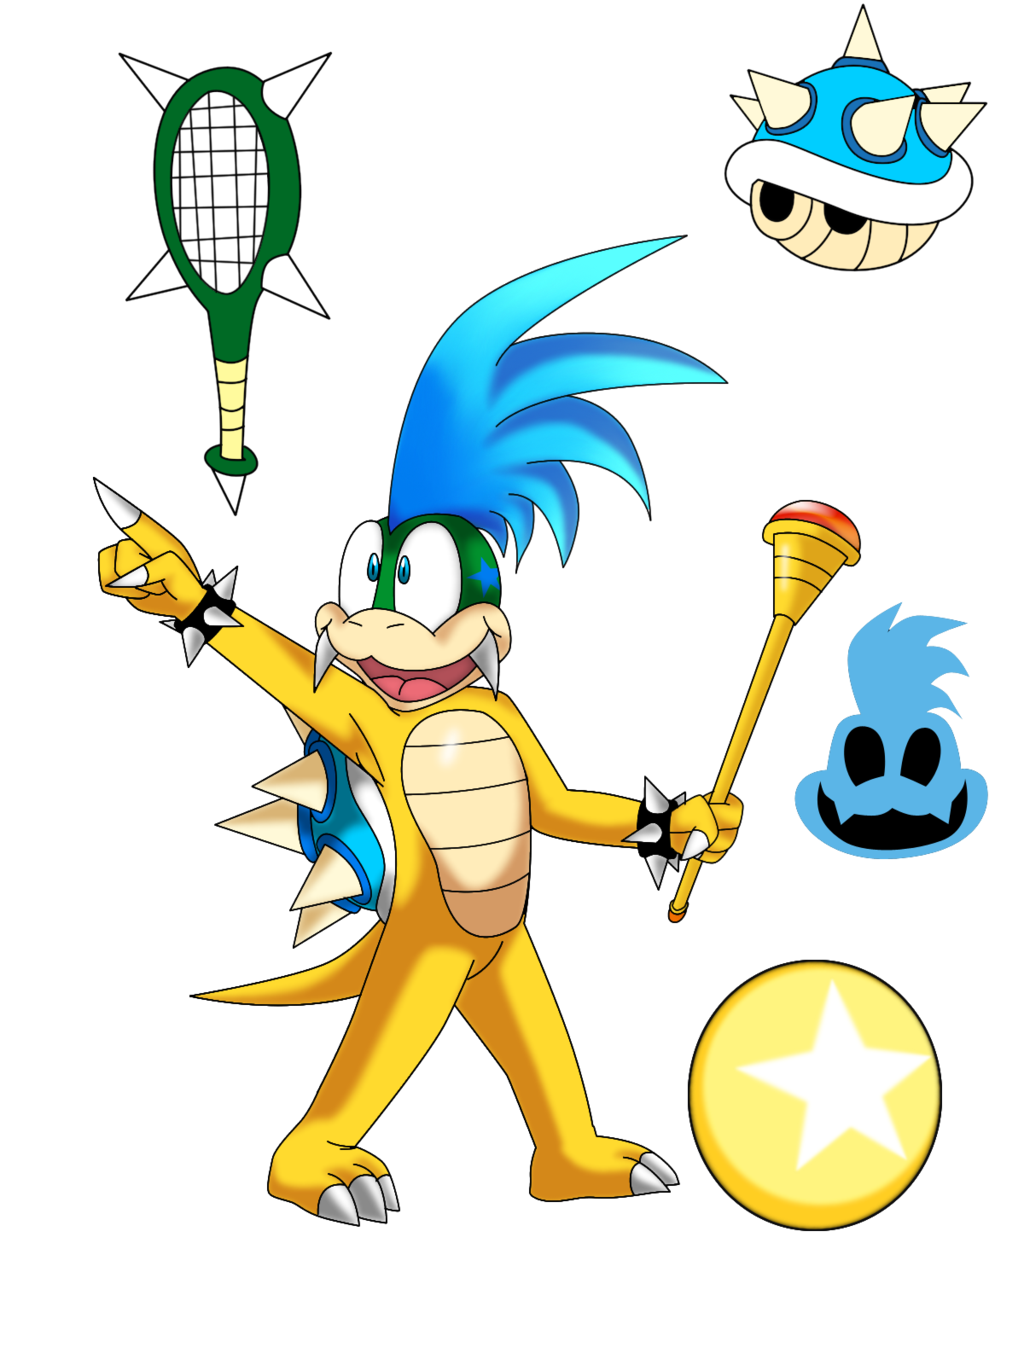 Koopalings Photos PNG Image High Quality PNG Image